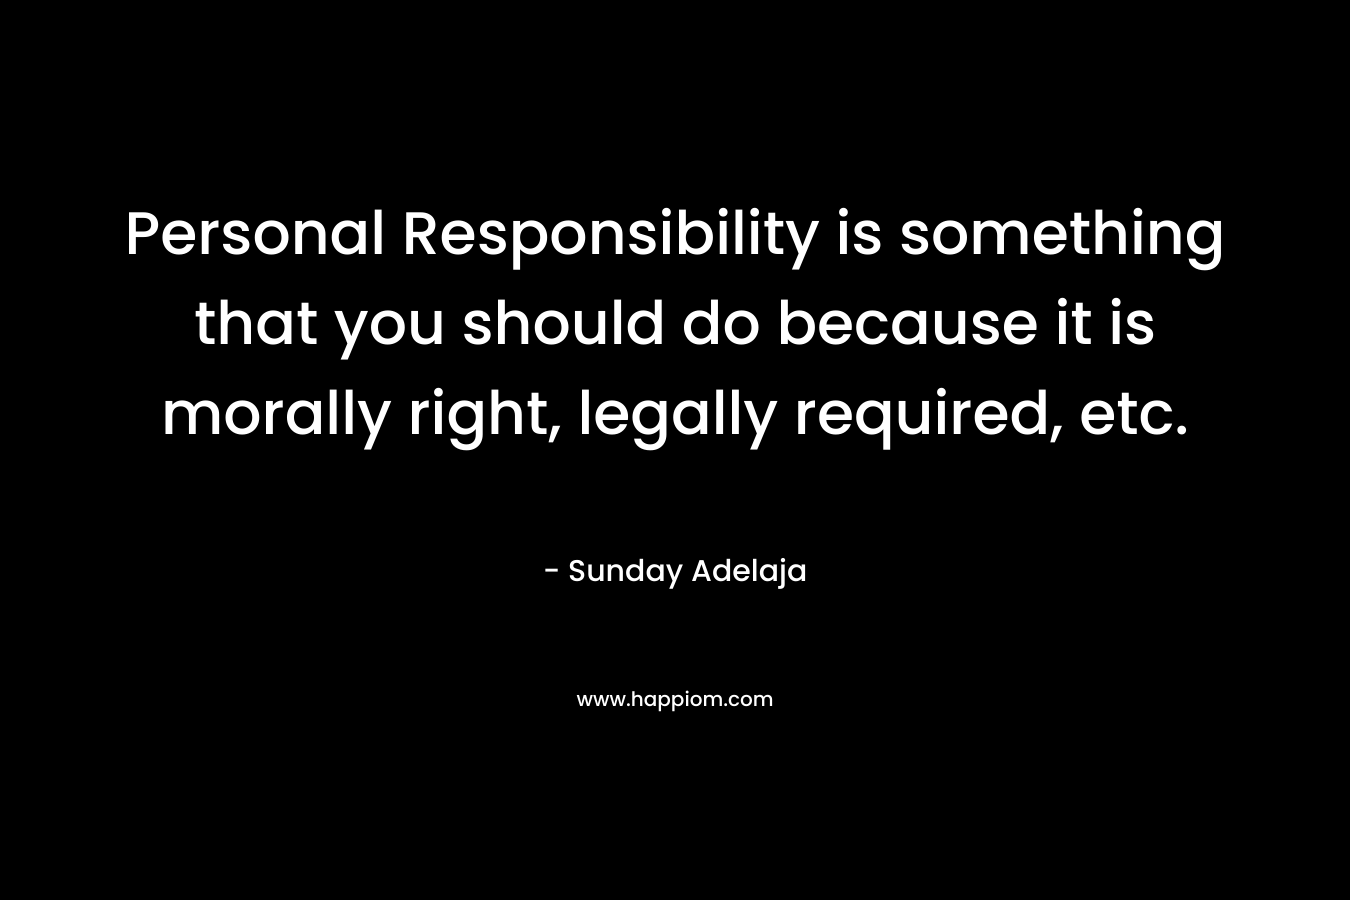 Personal Responsibility is something that you should do because it is morally right, legally required, etc. – Sunday Adelaja